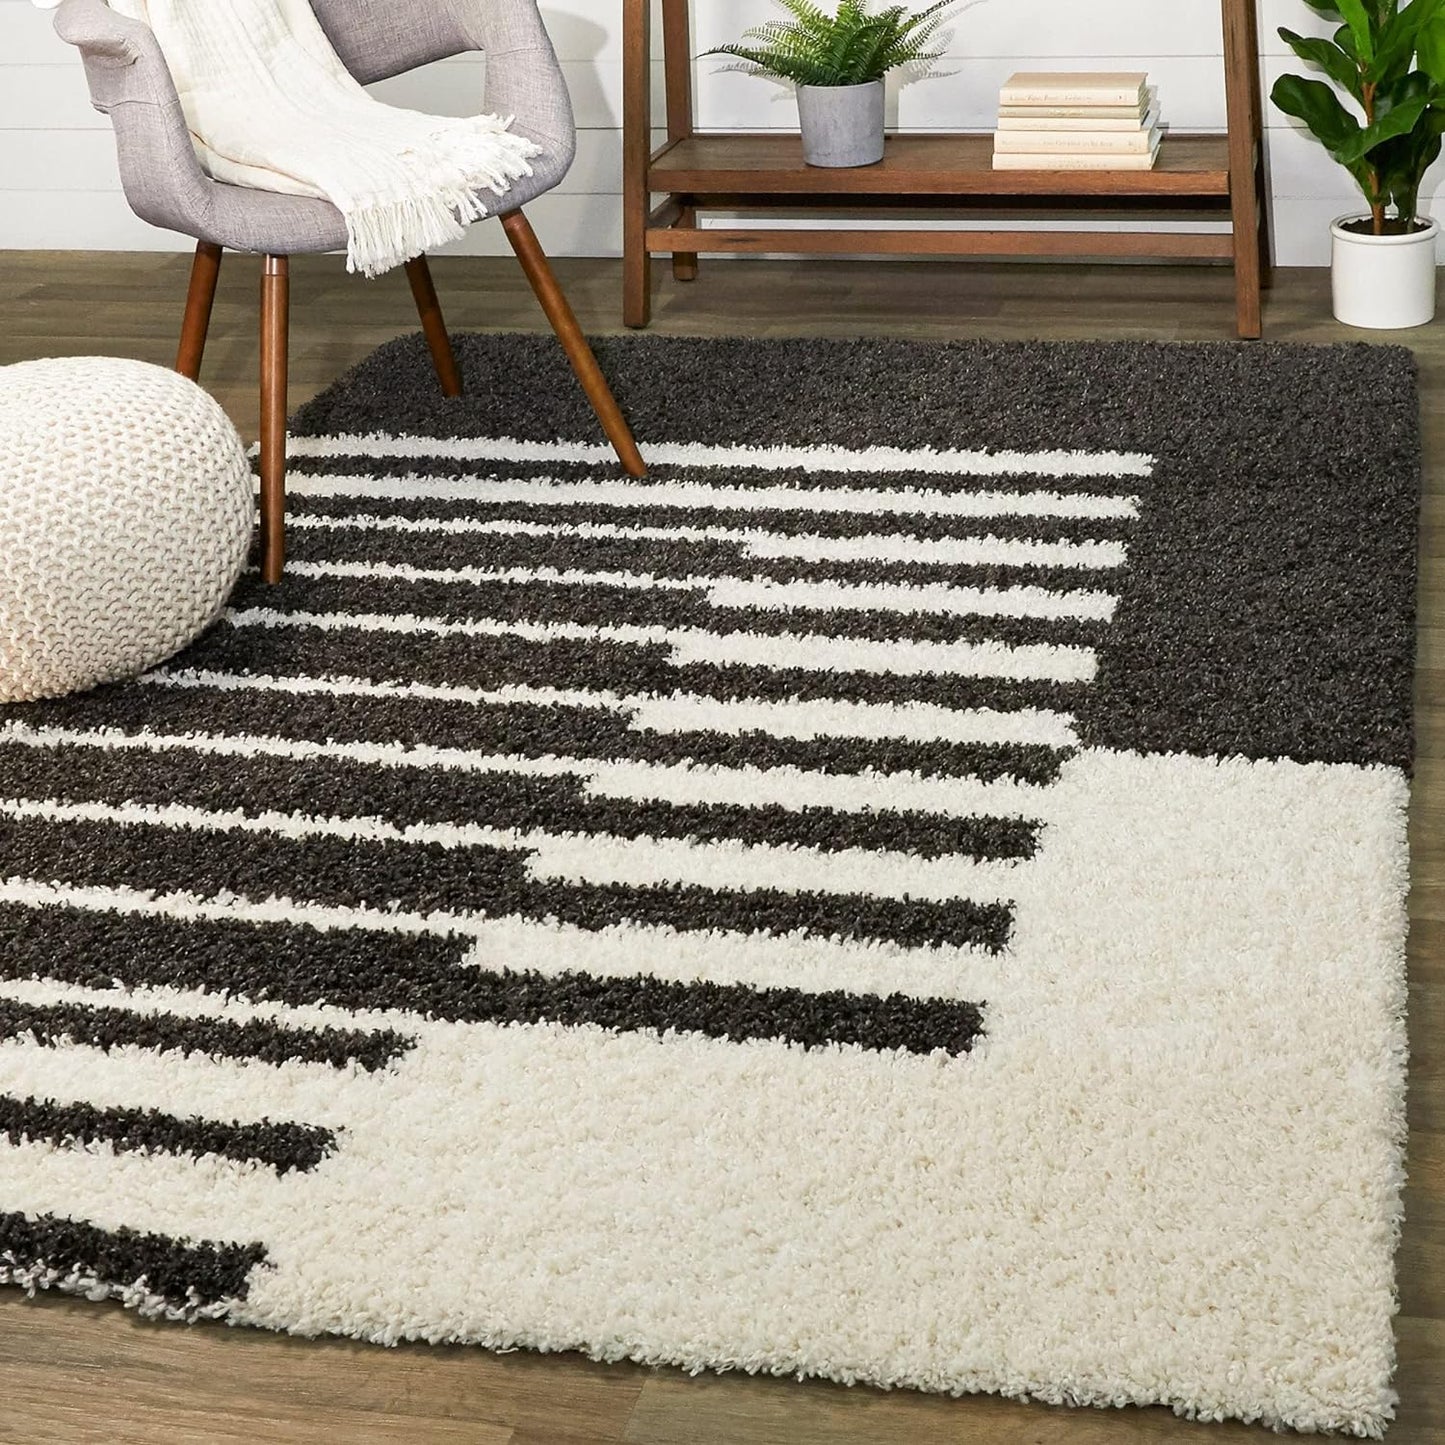 Kashyapa Rugs Collection - Latest Loom Tufted Black with Ivory Ultra Soft Anti Skid Handwoven Microfiber Shag Rug